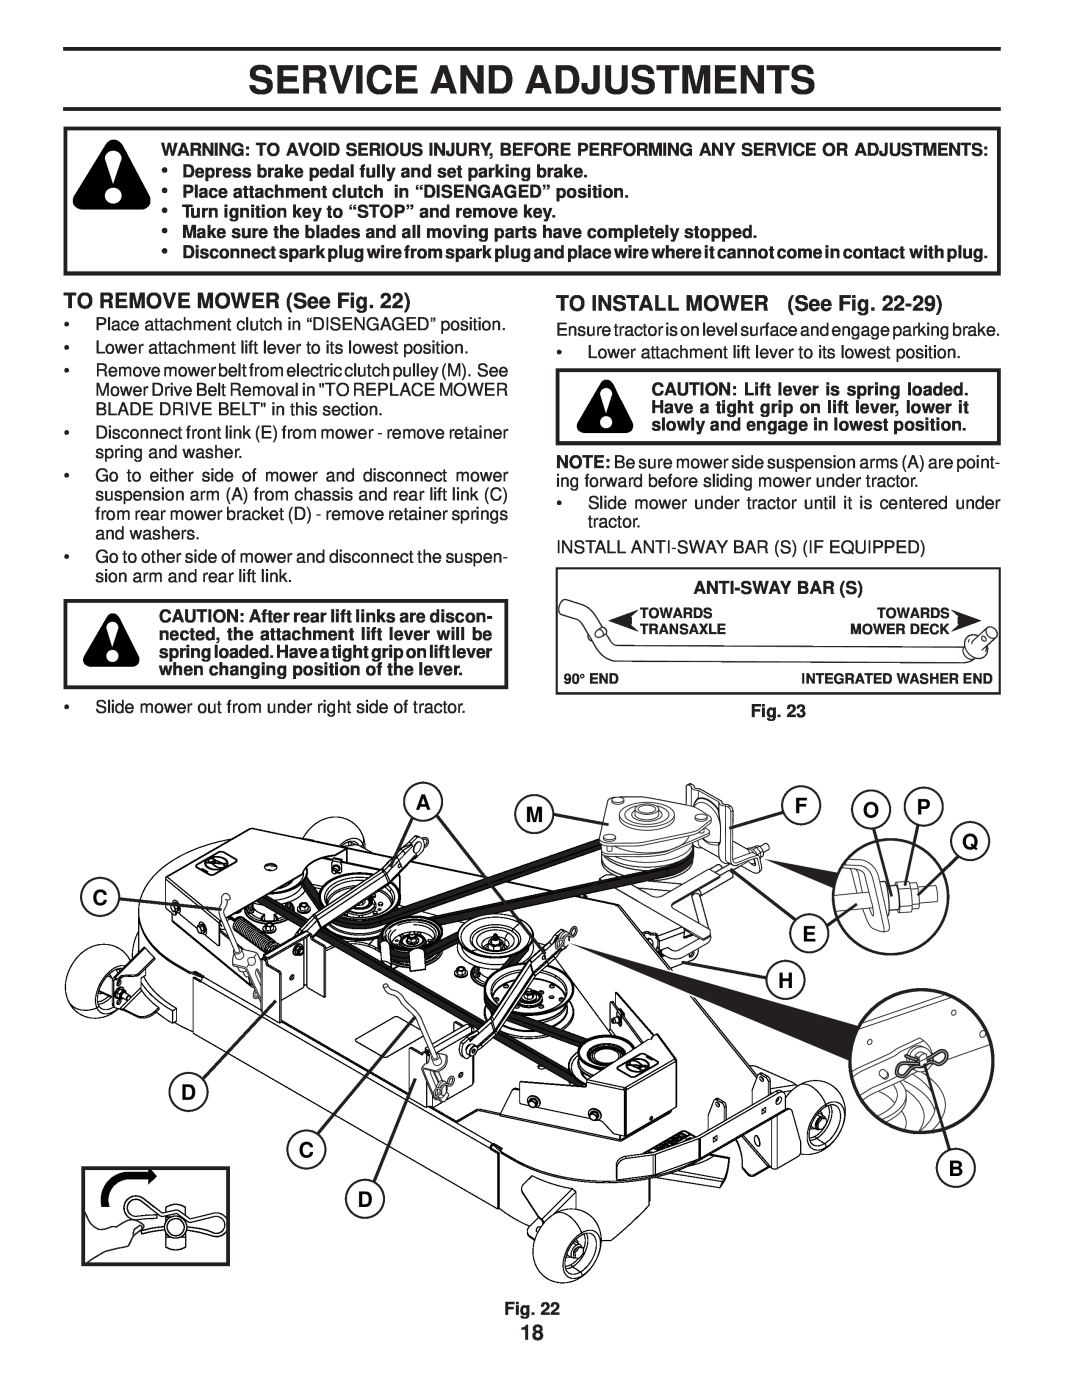 Husqvarna YTH2648 TF owner manual Service And Adjustments, TO REMOVE MOWER See Fig, TO INSTALL MOWER See Fig, A C D C D 